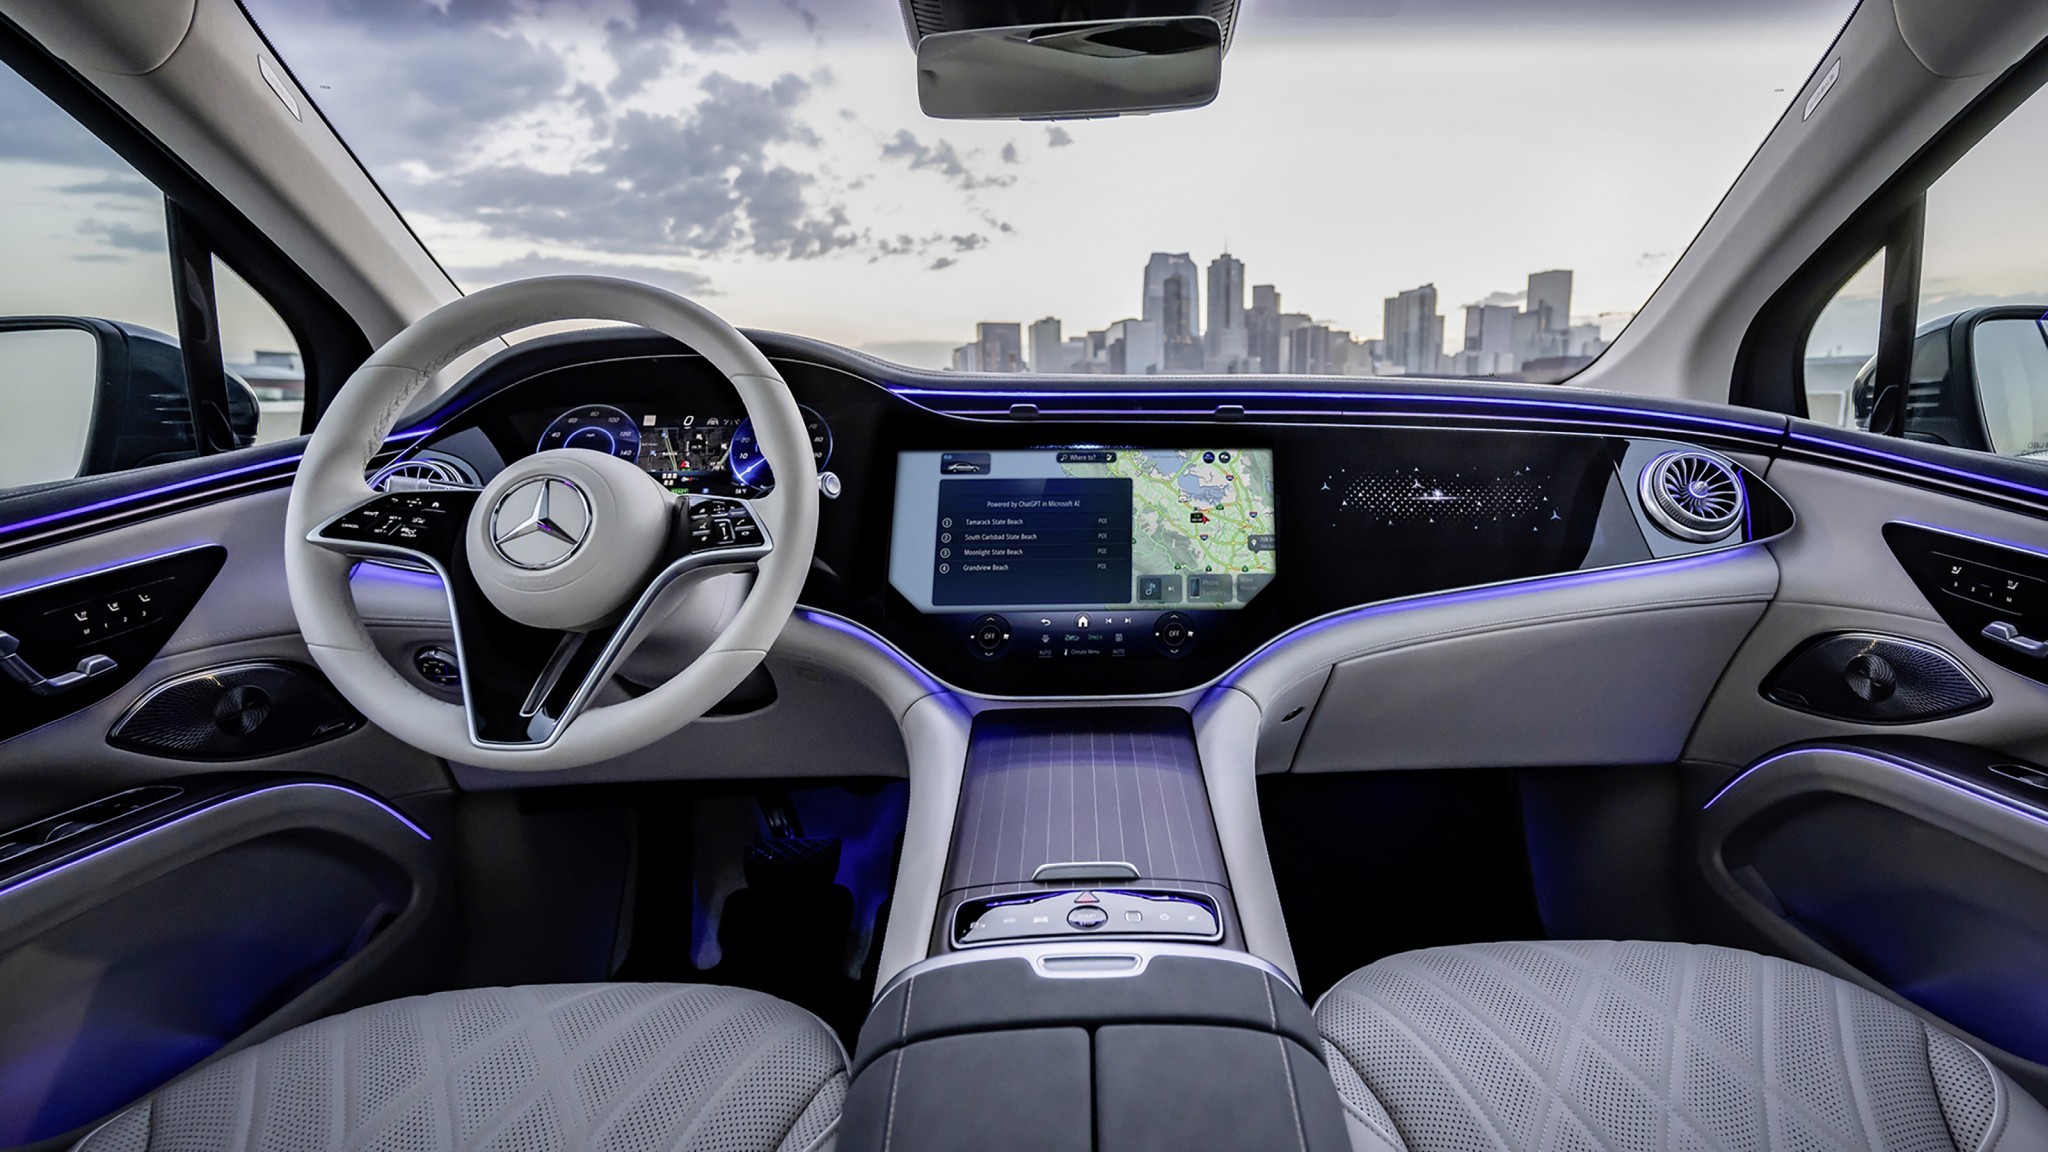 Mercedes Elevates In-Car Voice Control to New Levels, ChatGPT